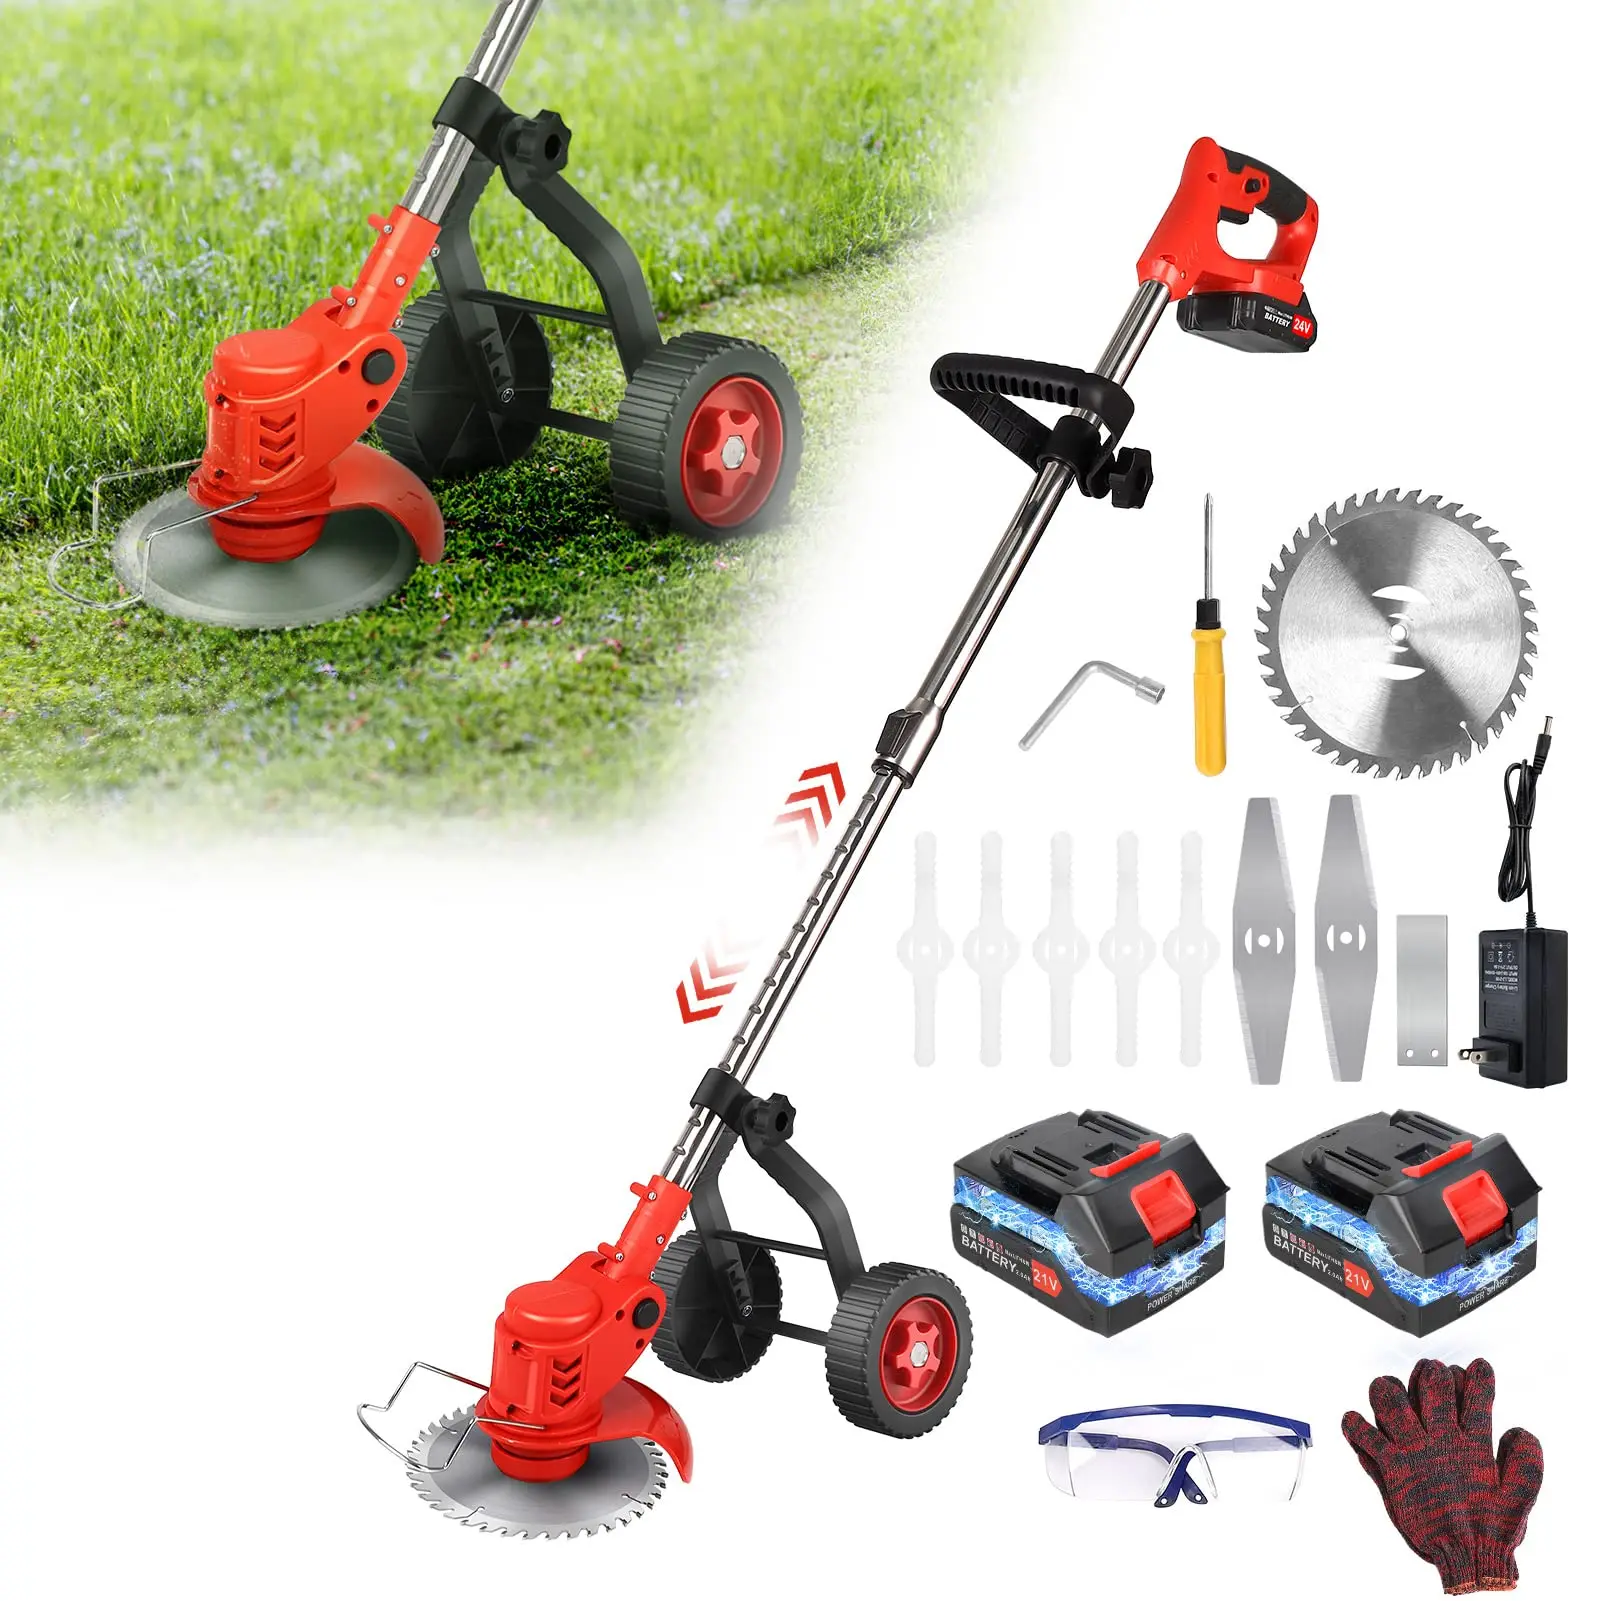 Grass Trimmer Cordless Electric Lawn Mower Hedge Trimmer Adjustable Handheld Garden Power Pruning with Upgraded Wheel Battery